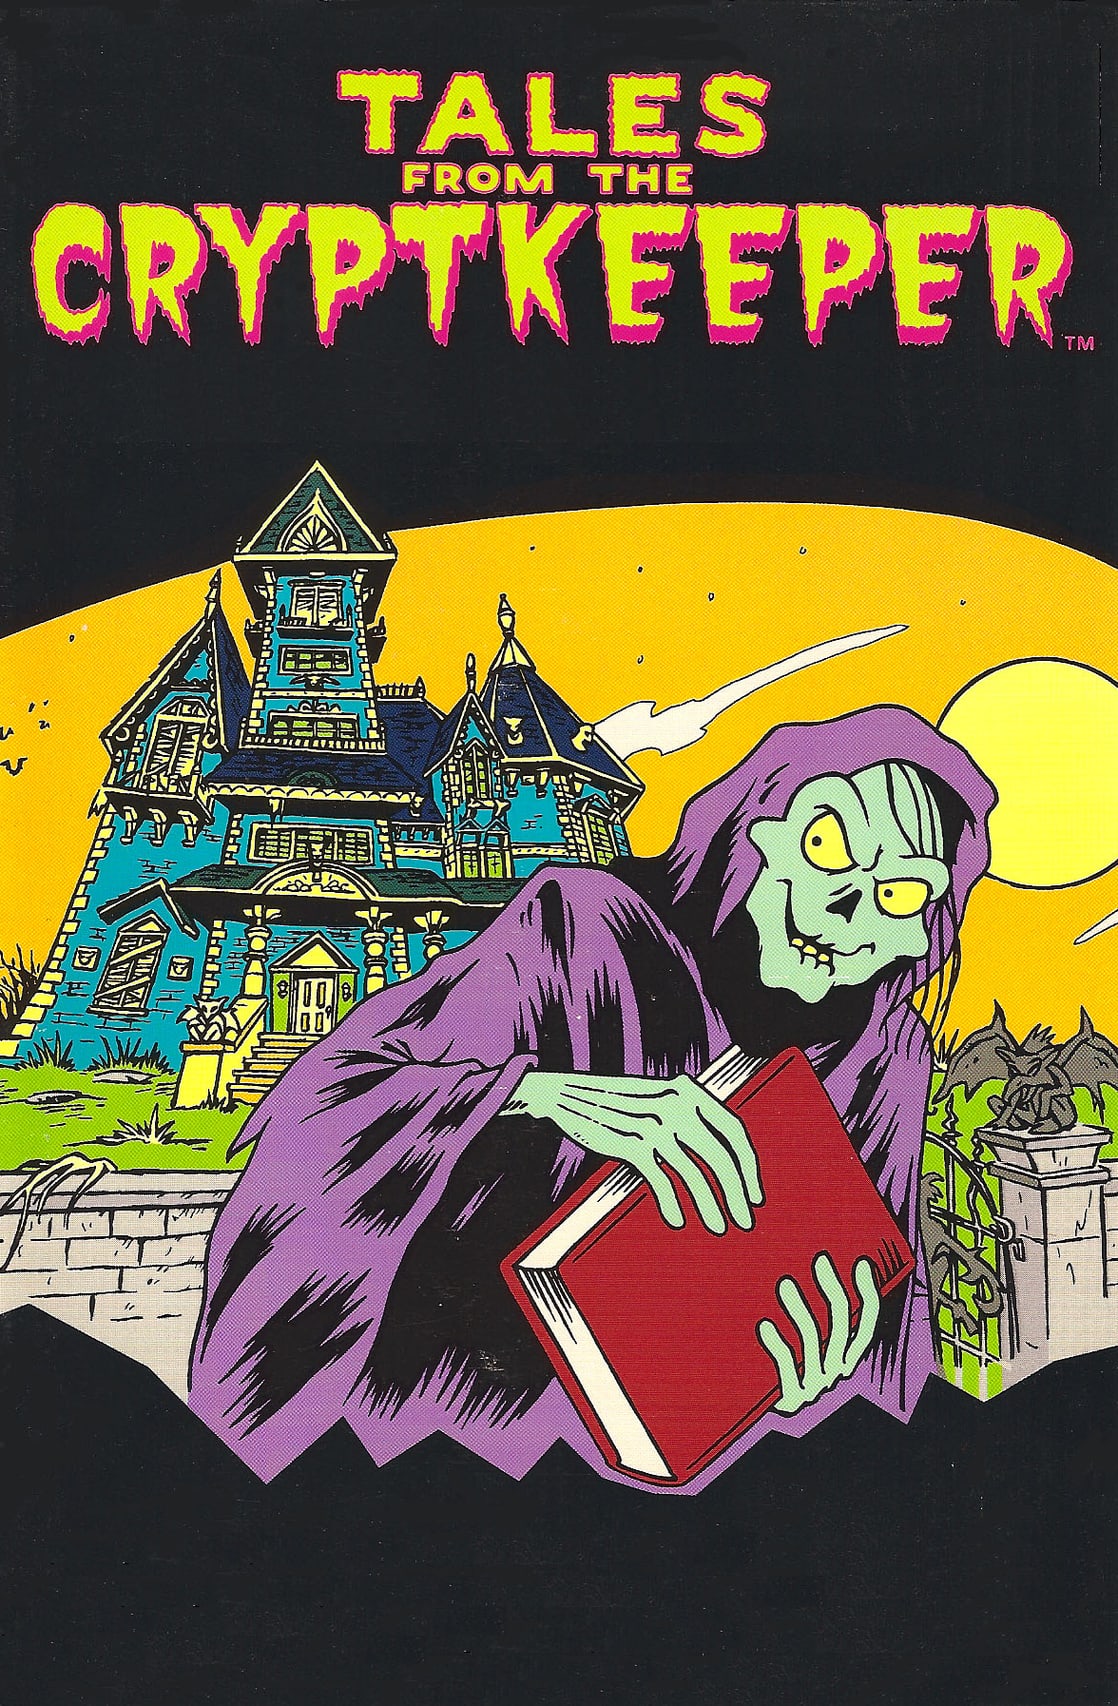 Tales from the Cryptkeeper | Tales From the Crypt Wiki | Fandom